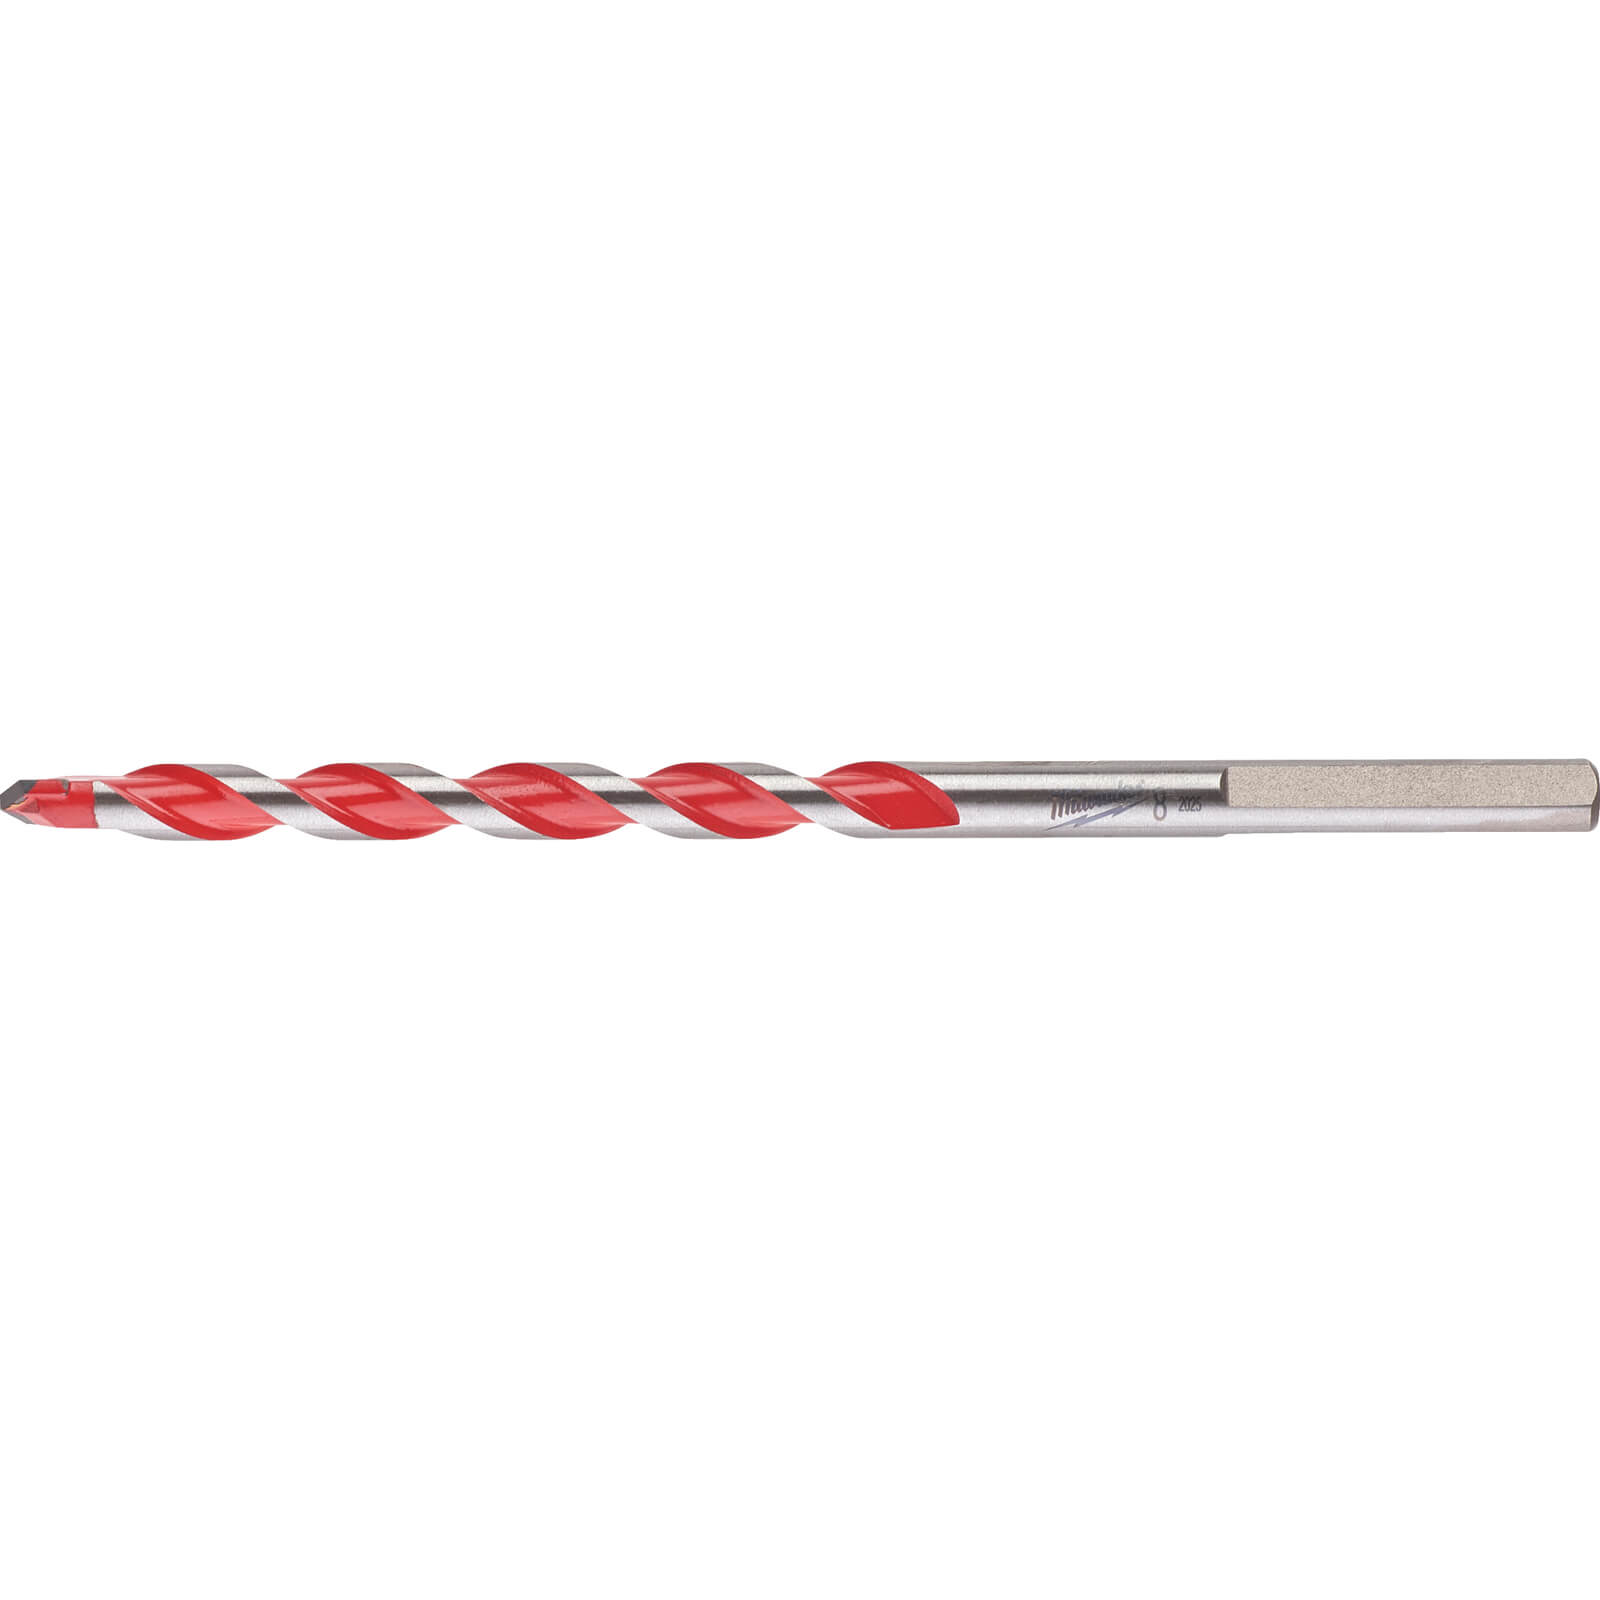 Image of Milwaukee Premium Concrete Drill 8mm 150mm Pack of 1